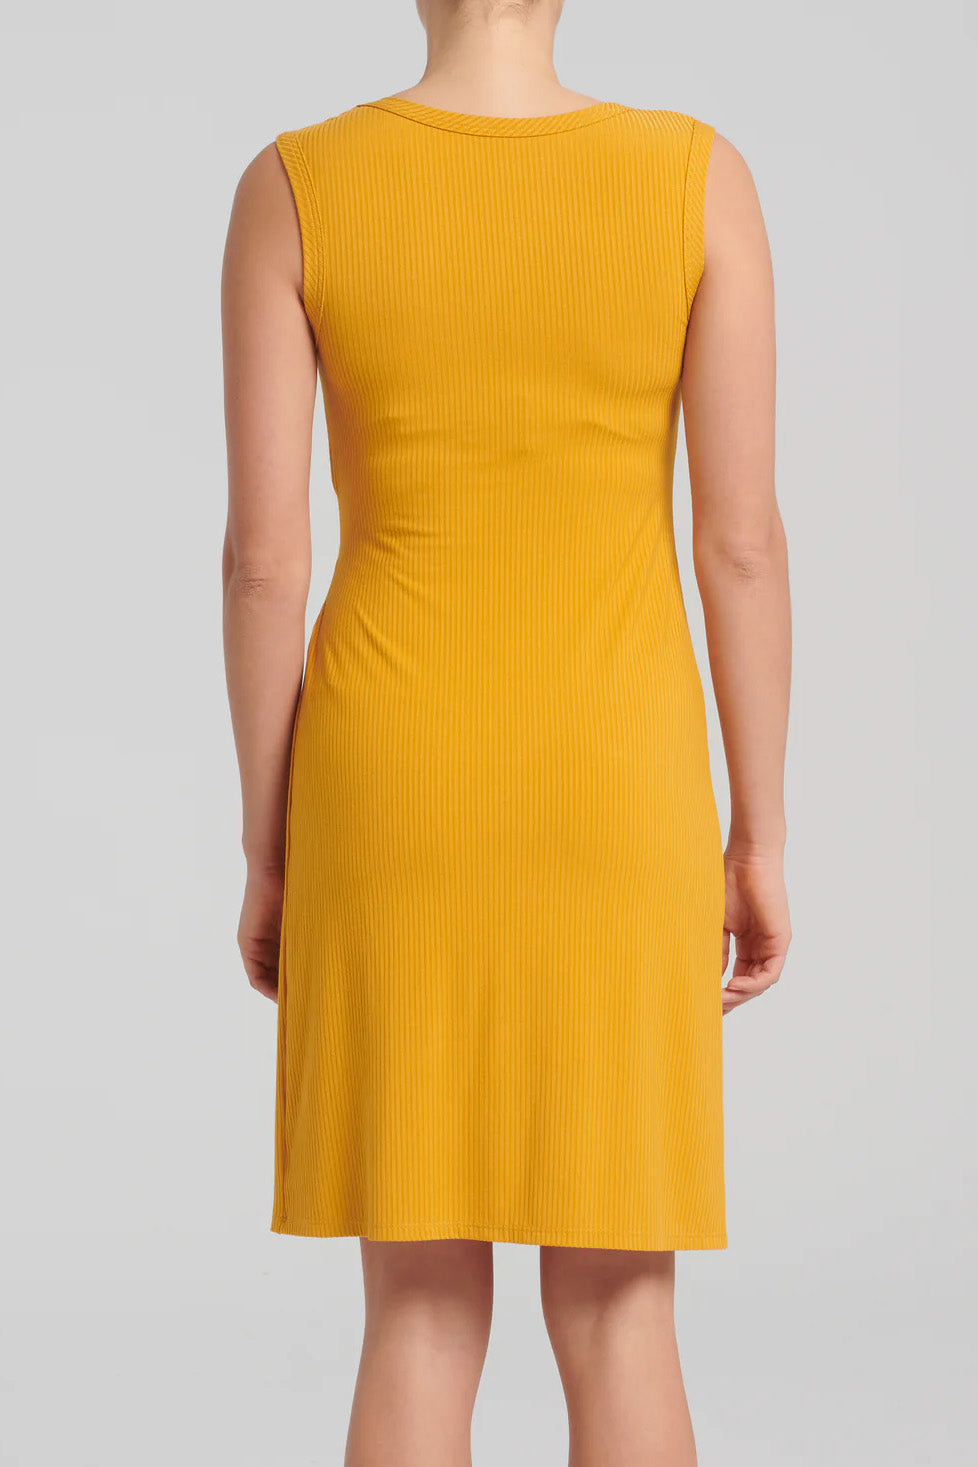 Saranya Dress by Kollontai, Topaz, back view, sleeveless, scoop neck, wide straps, bamboo rib-knit, pleat details at waist, straight cut, knee length, sizes XS to XXL, made in Quebec